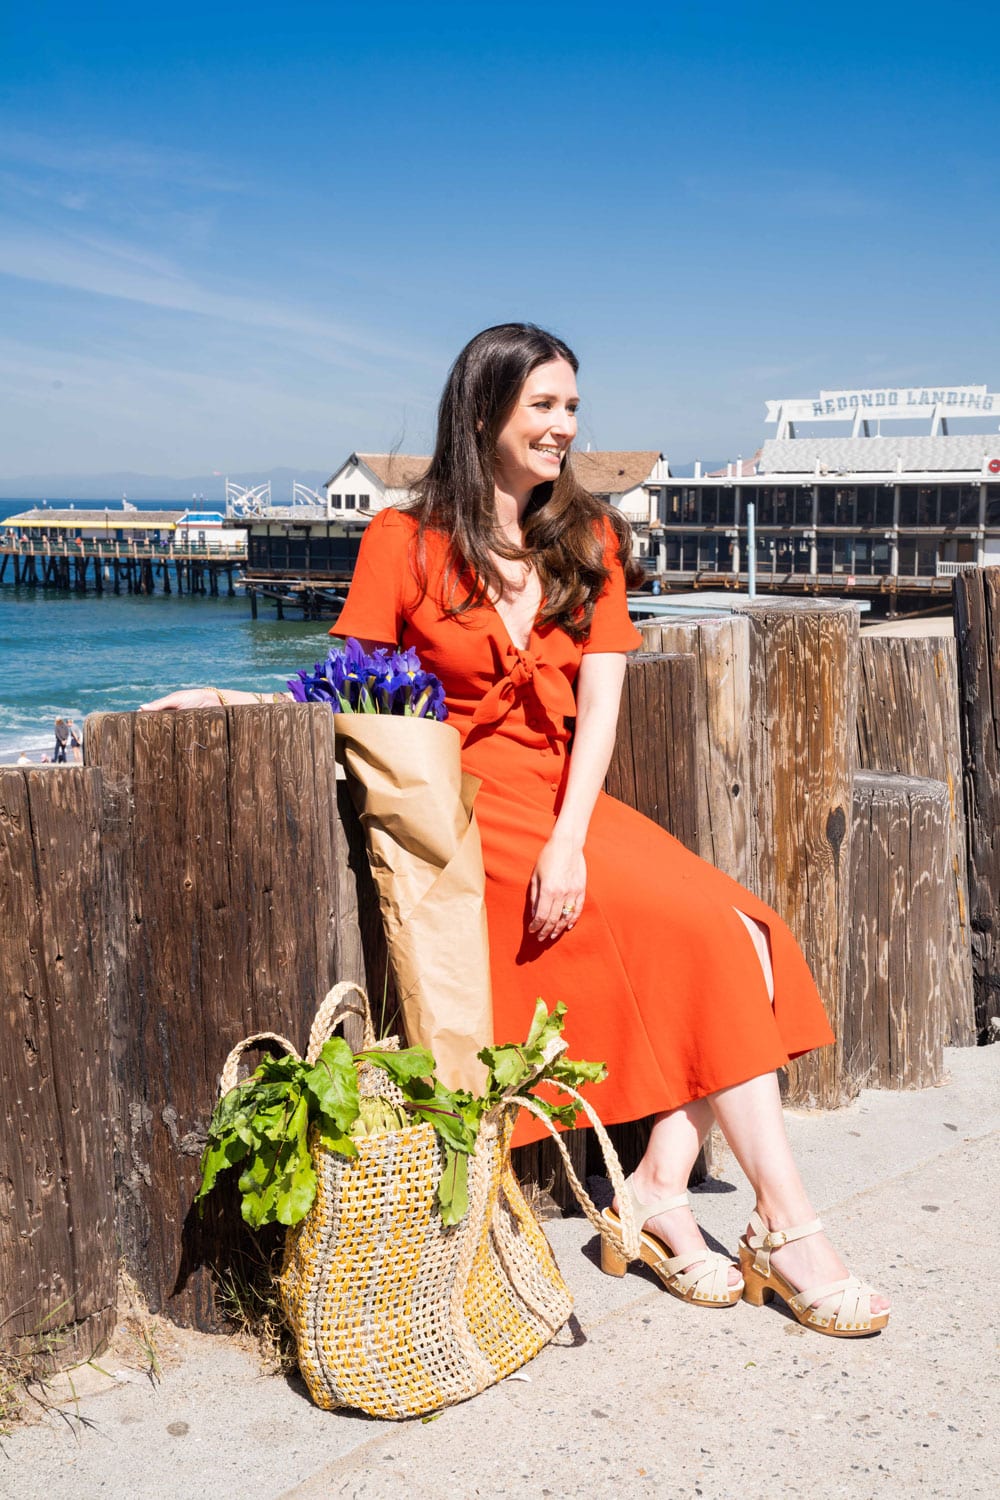 Emily Luxford, autoimmune, pediatric and food sensitivity dietitian, stands with goodies from the farmers market on a California pier